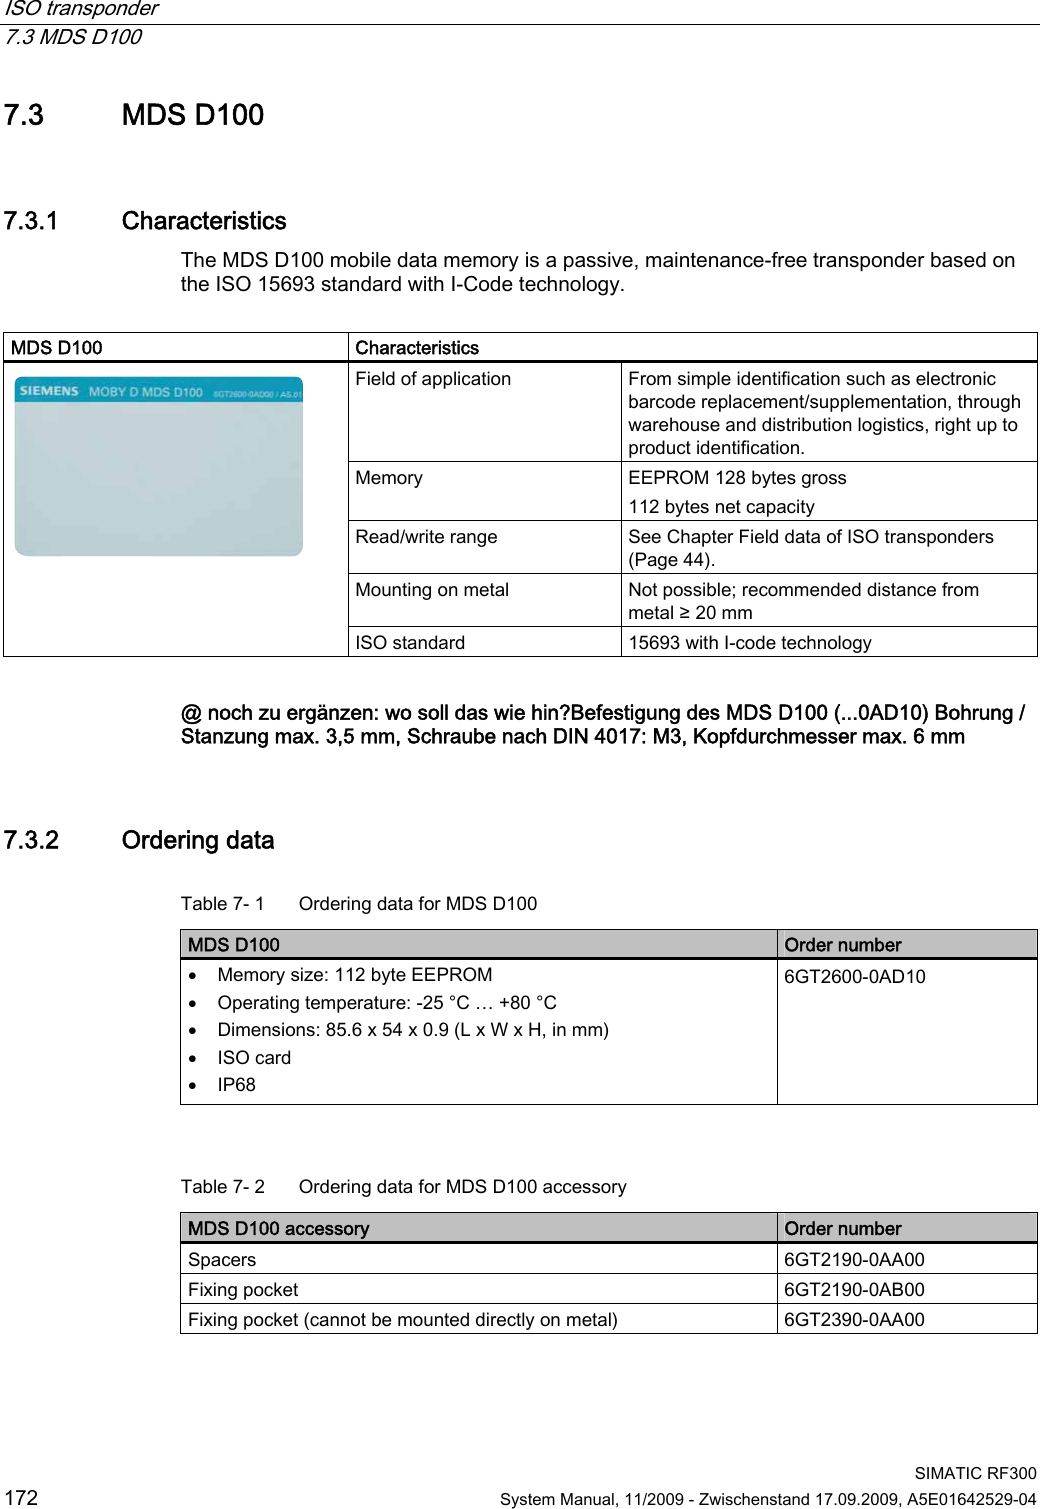 ISO transponder   7.3 MDS D100  SIMATIC RF300 172  System Manual, 11/2009 - Zwischenstand 17.09.2009, A5E01642529-04 7.3 MDS D100 7.3.1 Characteristics The MDS D100 mobile data memory is a passive, maintenance-free transponder based on the ISO 15693 standard with I-Code technology.  MDS D100  Characteristics Field of application  From simple identification such as electronic barcode replacement/supplementation, through warehouse and distribution logistics, right up to product identification. Memory  EEPROM 128 bytes gross 112 bytes net capacity Read/write range  See Chapter Field data of ISO transponders (Page 44). Mounting on metal  Not possible; recommended distance from metal ≥ 20 mm  ISO standard  15693 with I-code technology  @ noch zu ergänzen: wo soll das wie hin?Befestigung des MDS D100 (...0AD10) Bohrung / Stanzung max. 3,5 mm, Schraube nach DIN 4017: M3, Kopfdurchmesser max. 6 mm 7.3.2 Ordering data Table 7- 1  Ordering data for MDS D100 MDS D100  Order number  Memory size: 112 byte EEPROM  Operating temperature: -25 °C … +80 °C  Dimensions: 85.6 x 54 x 0.9 (L x W x H, in mm)  ISO card  IP68 6GT2600-0AD10   Table 7- 2  Ordering data for MDS D100 accessory MDS D100 accessory  Order number Spacers  6GT2190-0AA00 Fixing pocket  6GT2190-0AB00 Fixing pocket (cannot be mounted directly on metal)  6GT2390-0AA00 